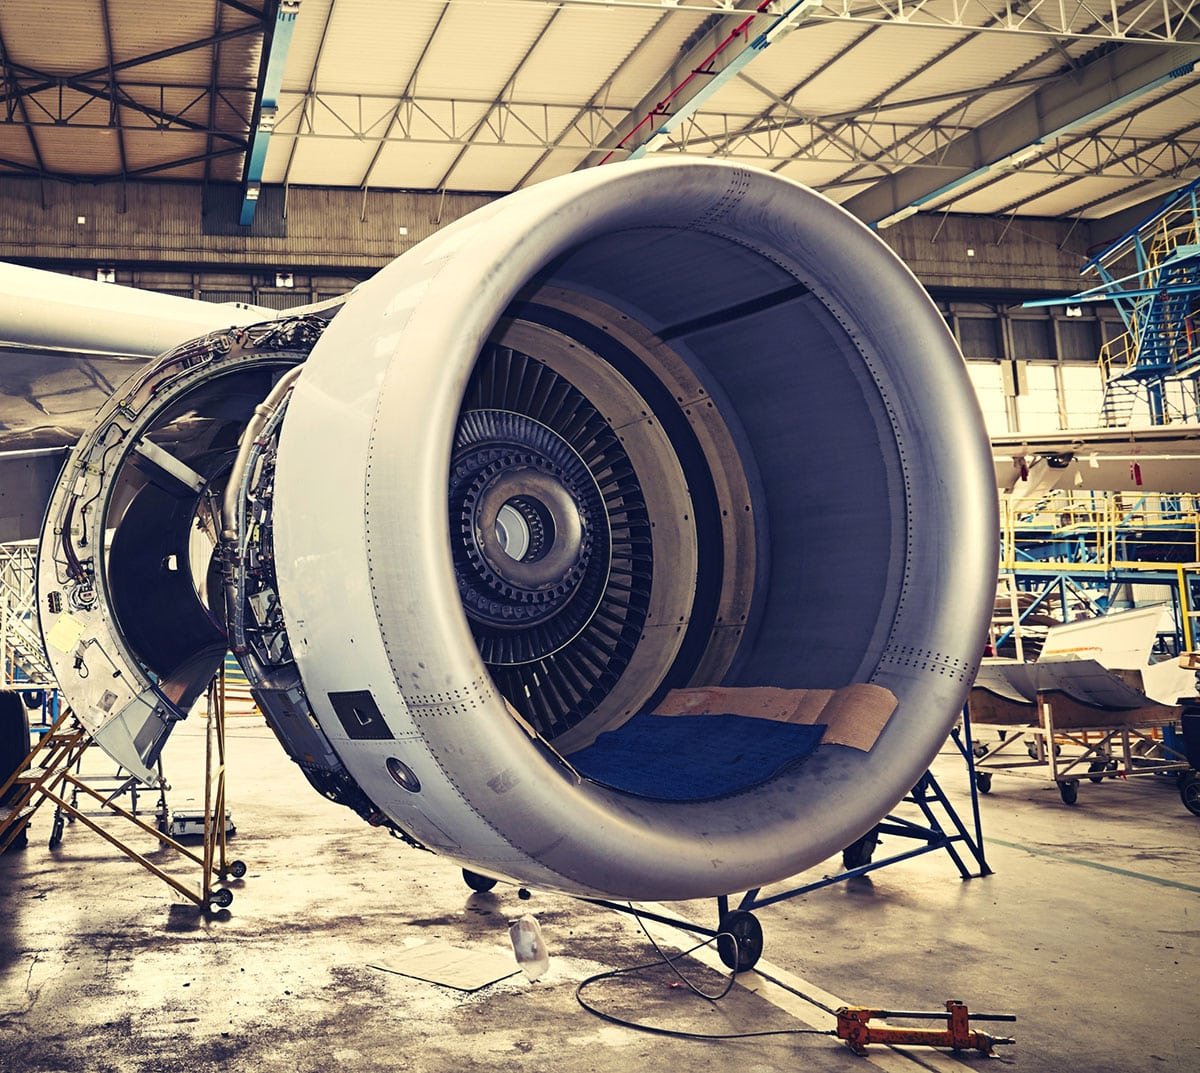 A partially disassembled jet engine in a hangar